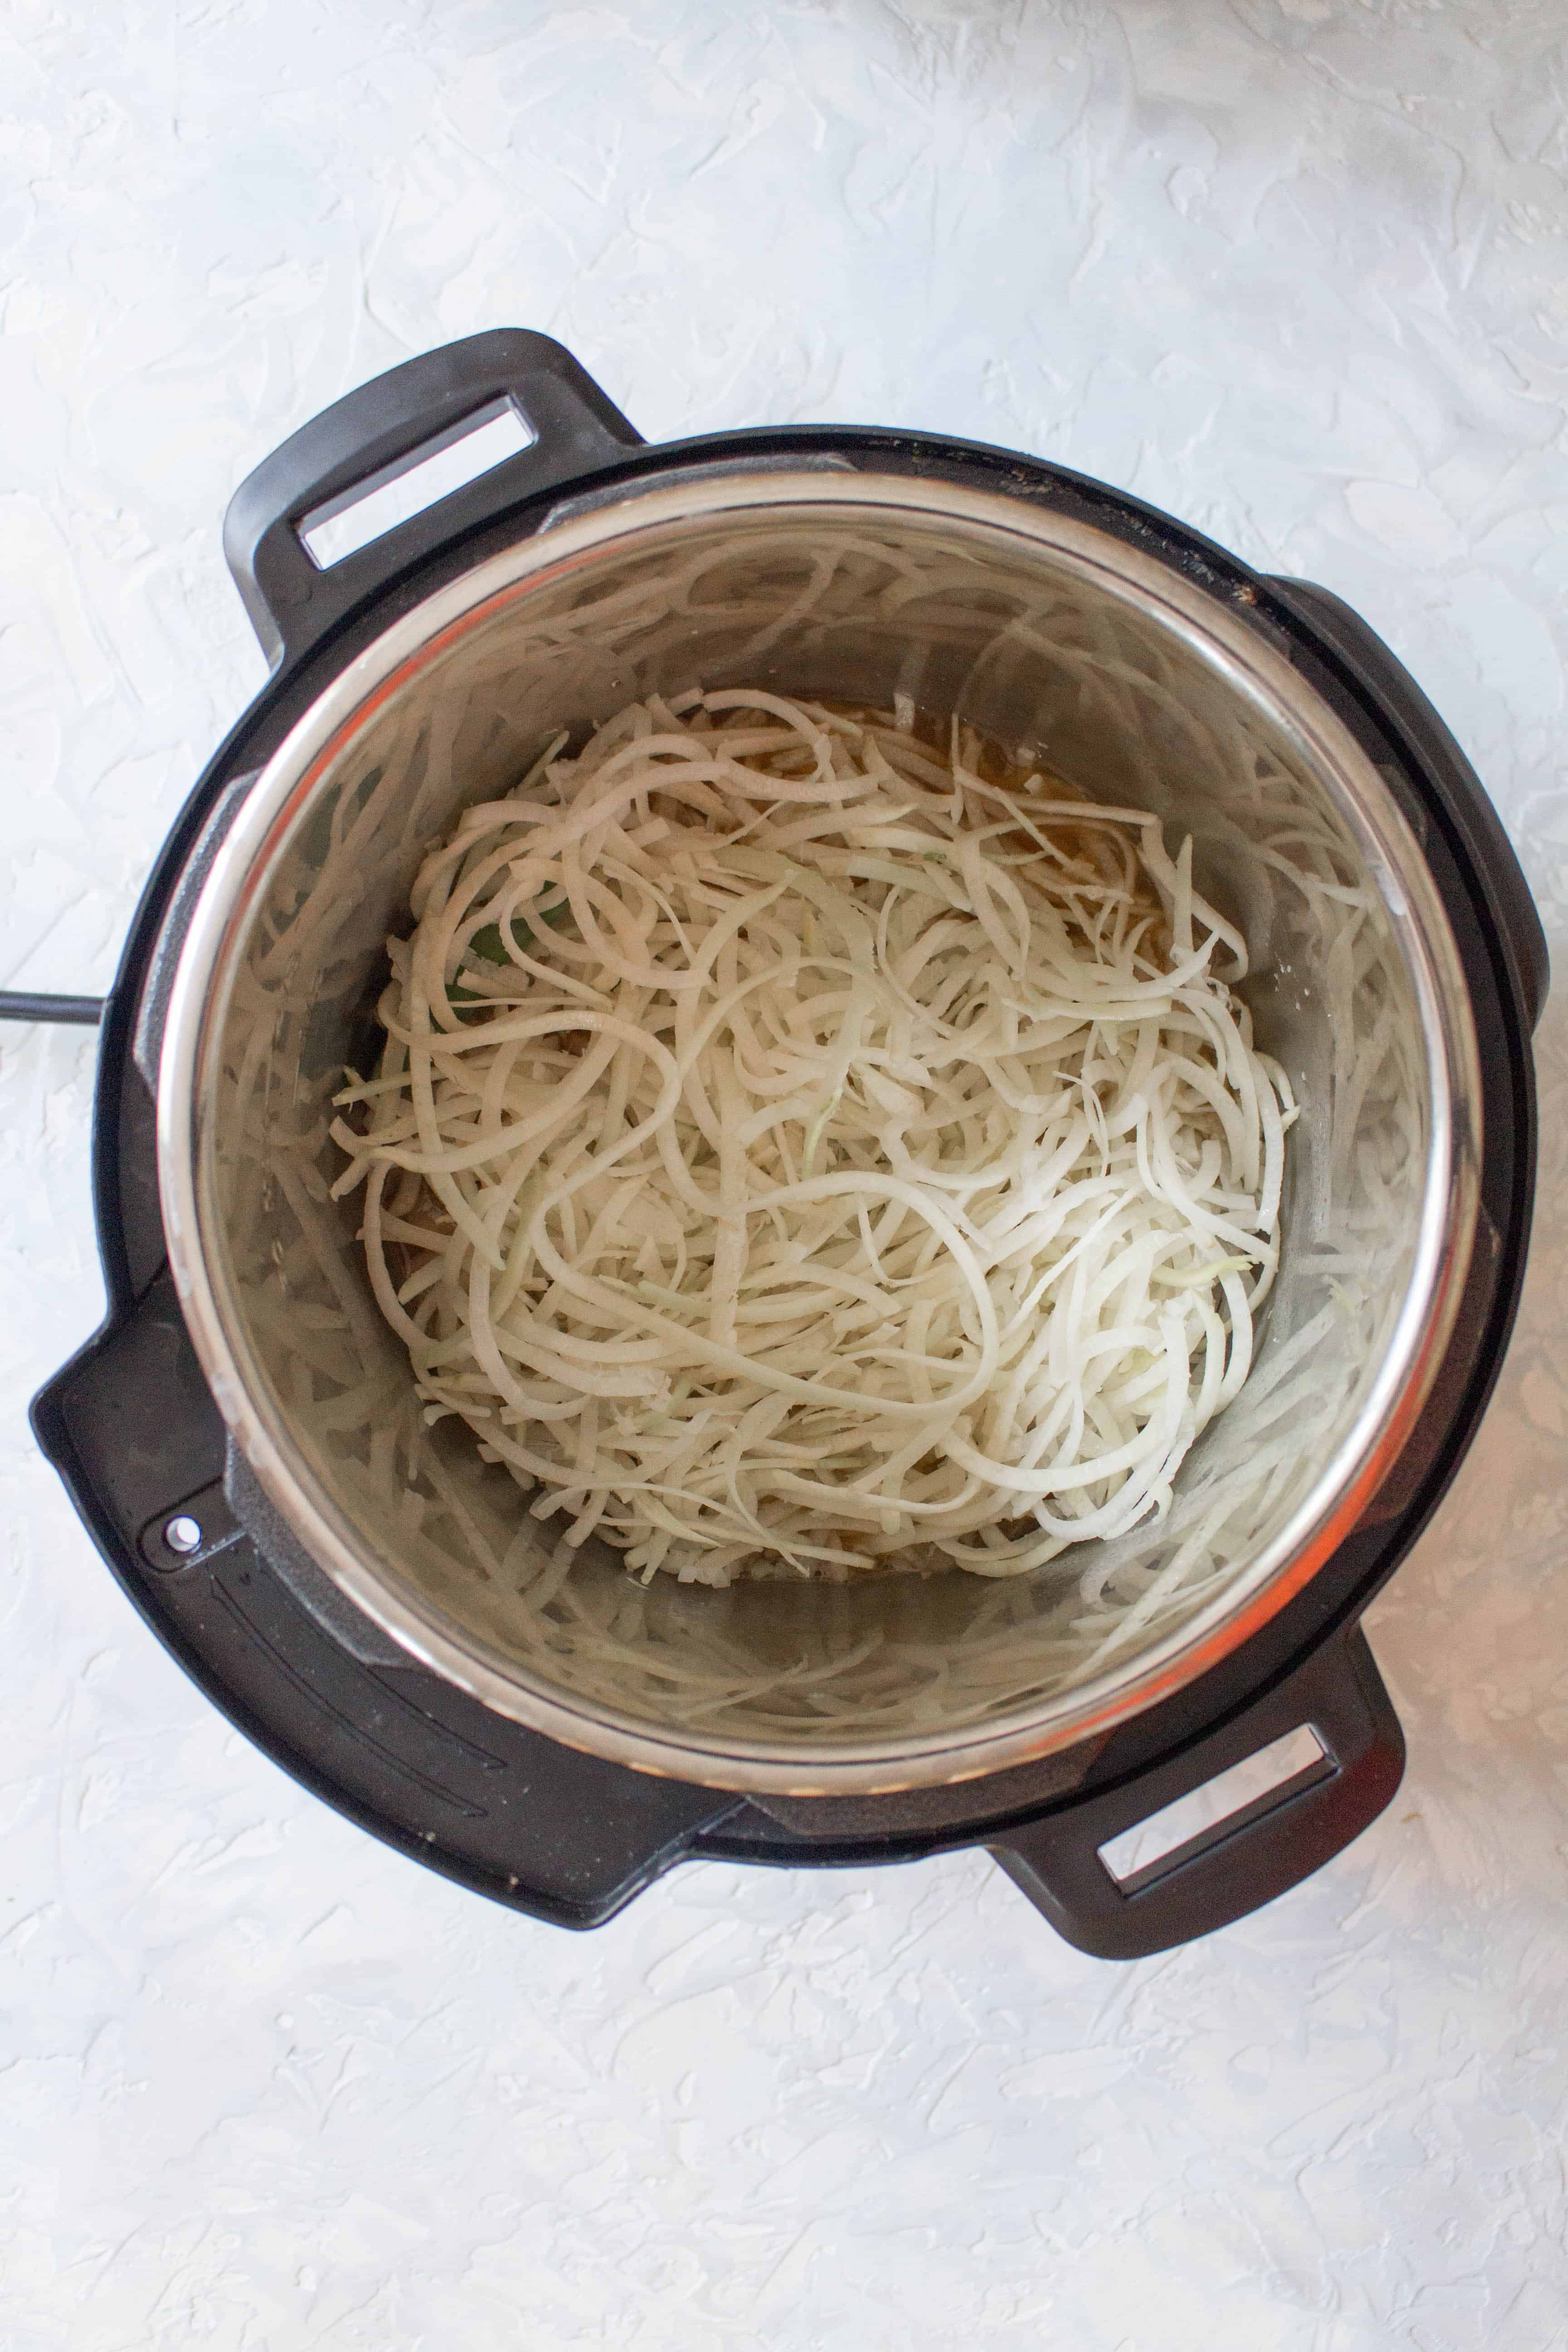 Craving a delicious lo mein but want to cut back on the carbs? Try this delicious low carb lo mein made with kohlrabi noodles made in under 10 minutes in an Instant Pot!